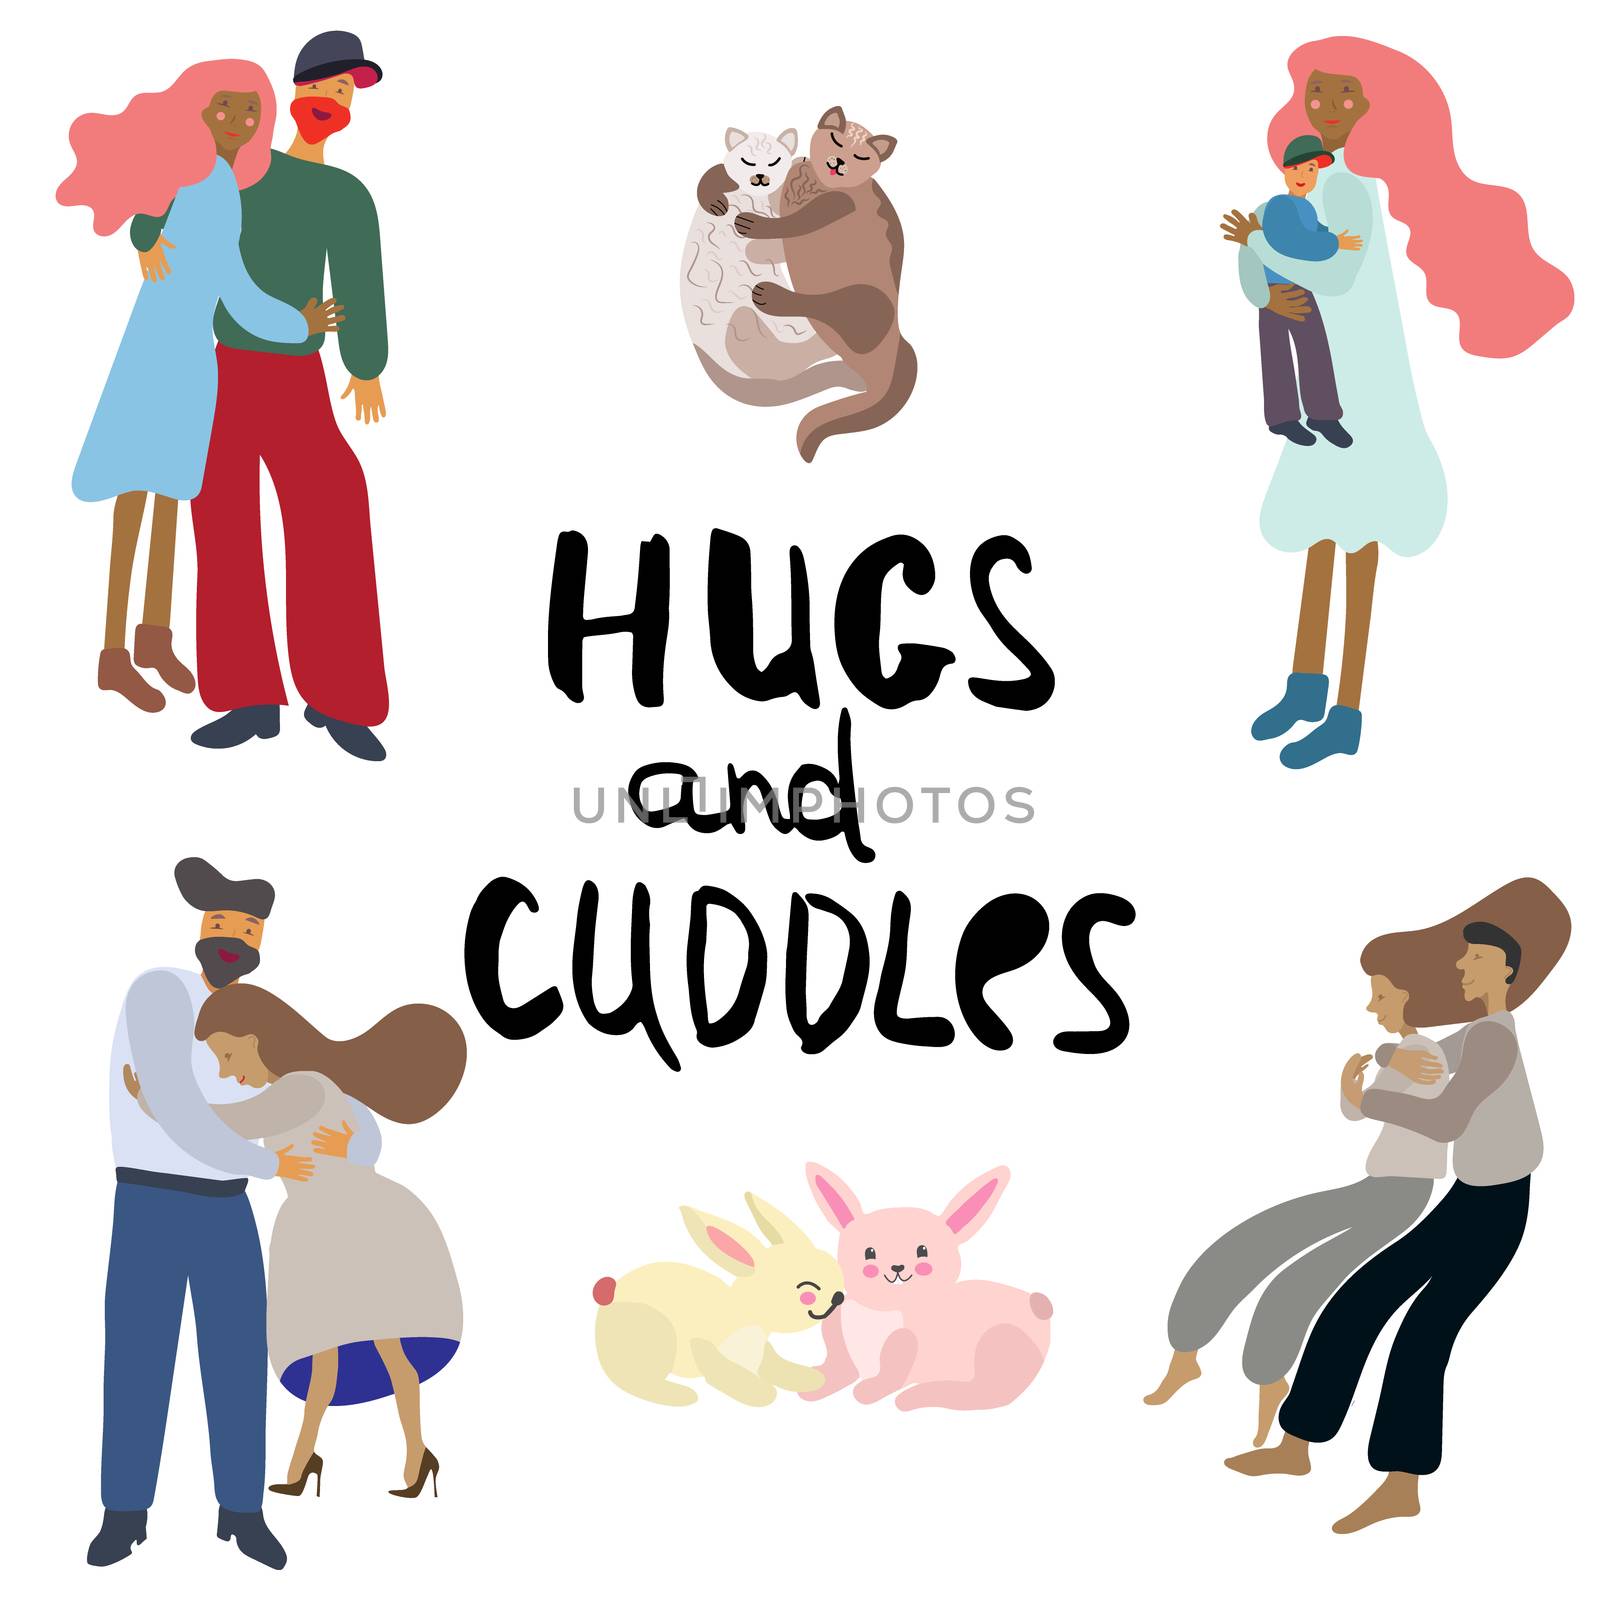 Hugs and cuddles people and animals. by Nata_Prando